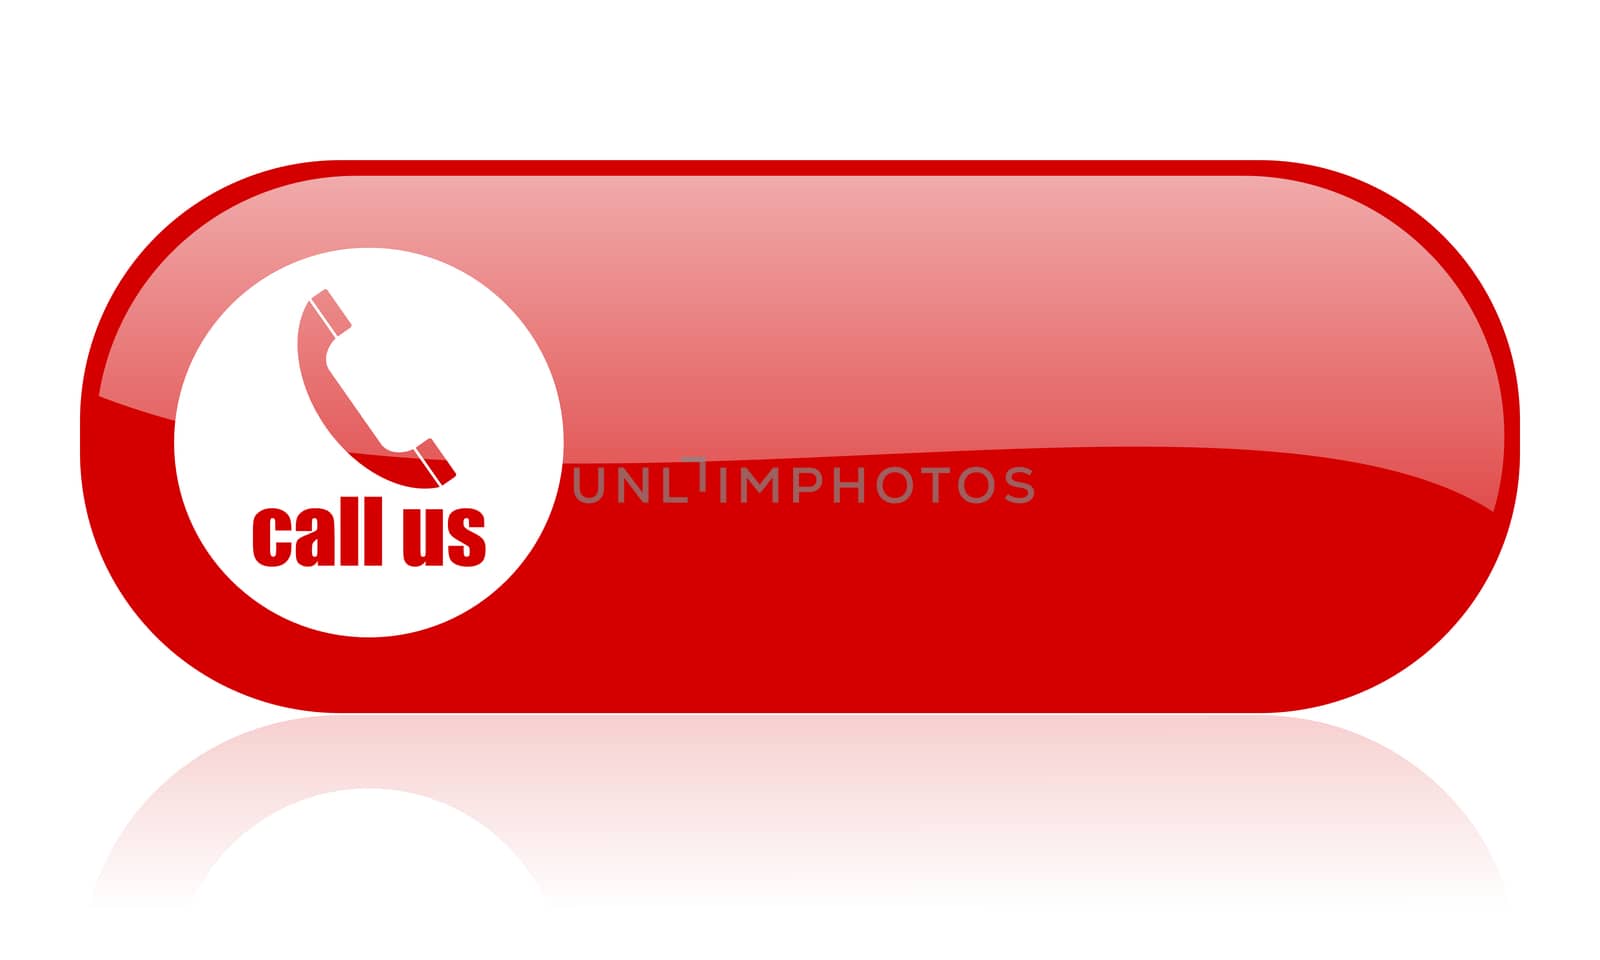 call us red web glossy icon